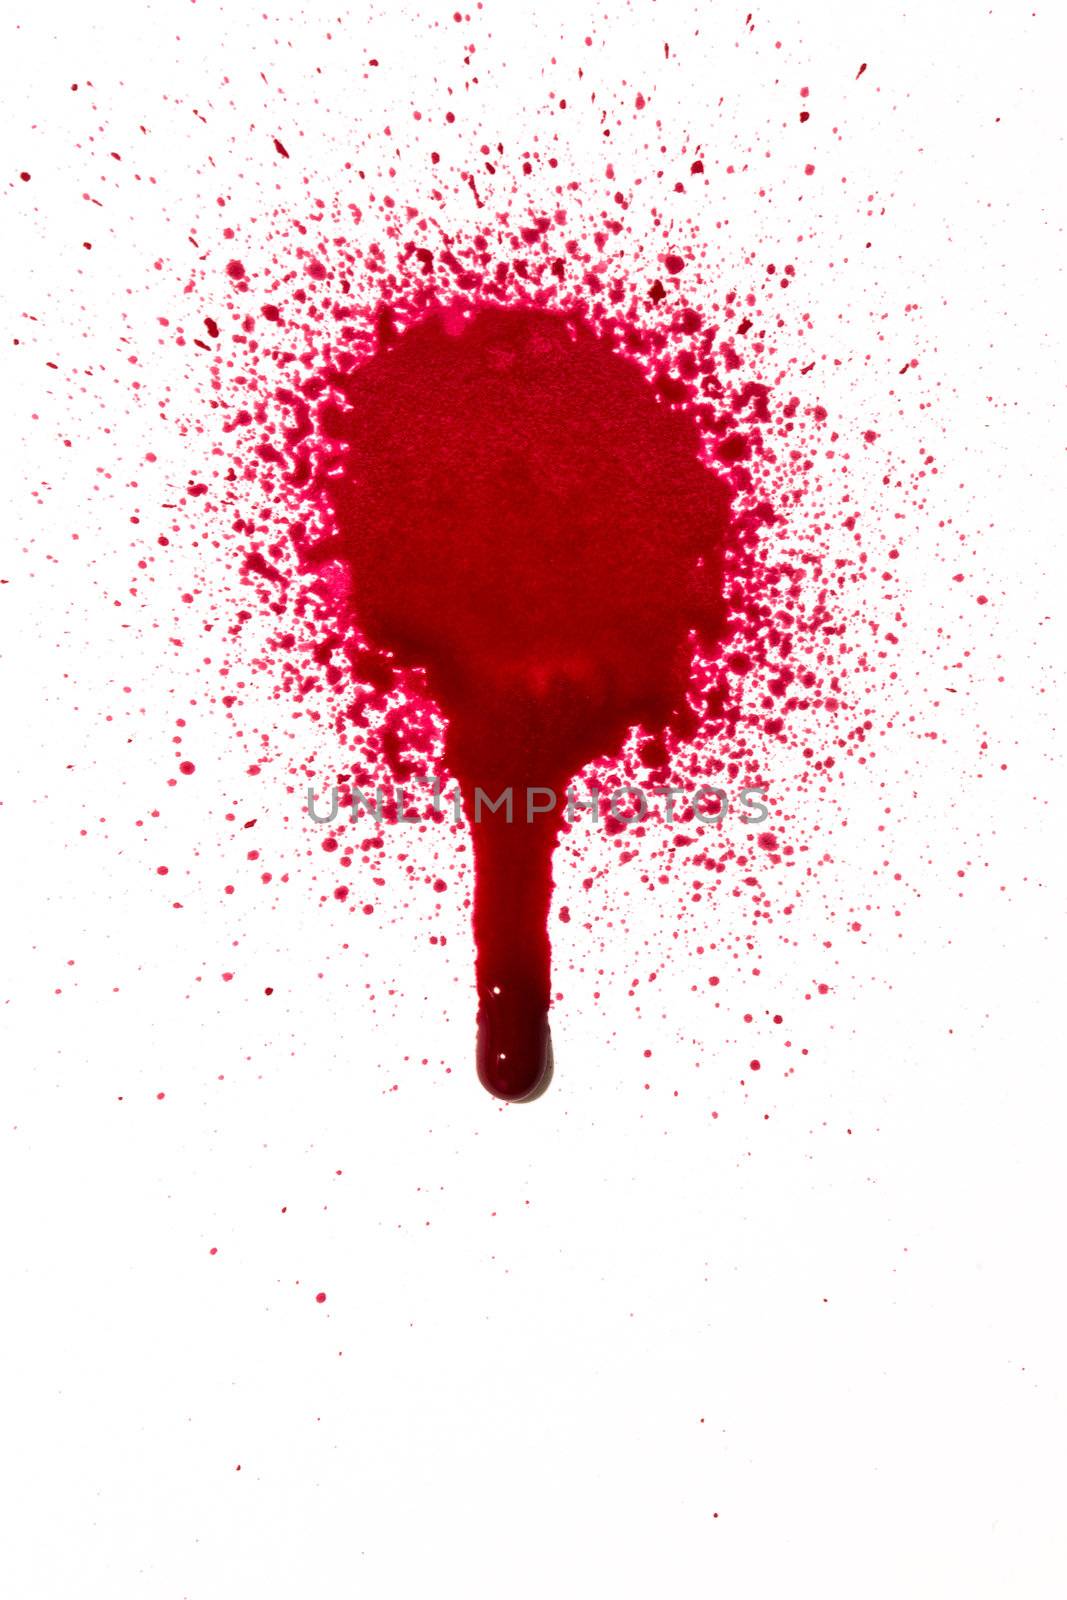 A high resolution image of a blood splat and drips